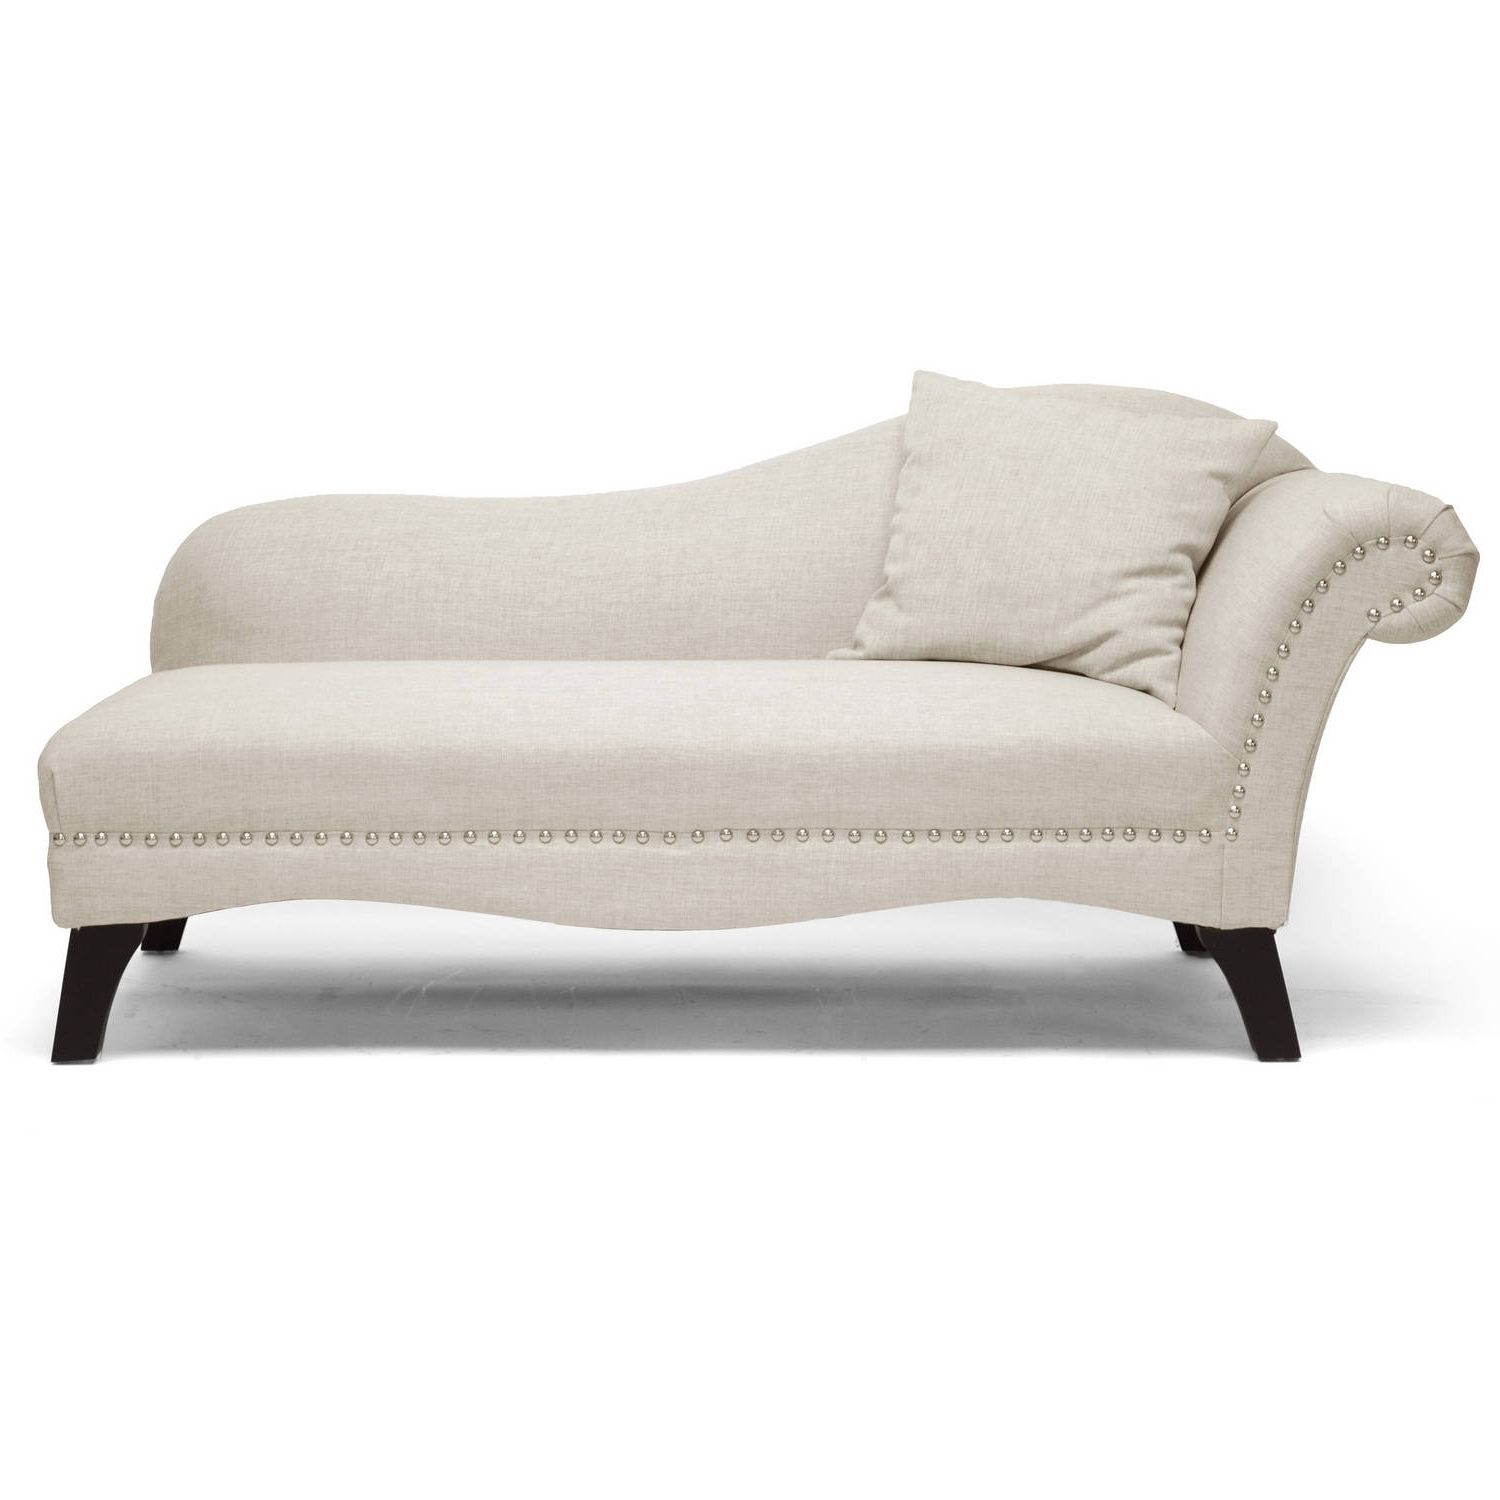 Best And Newest Chaise Lounge Chairs With Arms Throughout Chaise Lounges – Walmart (View 2 of 15)